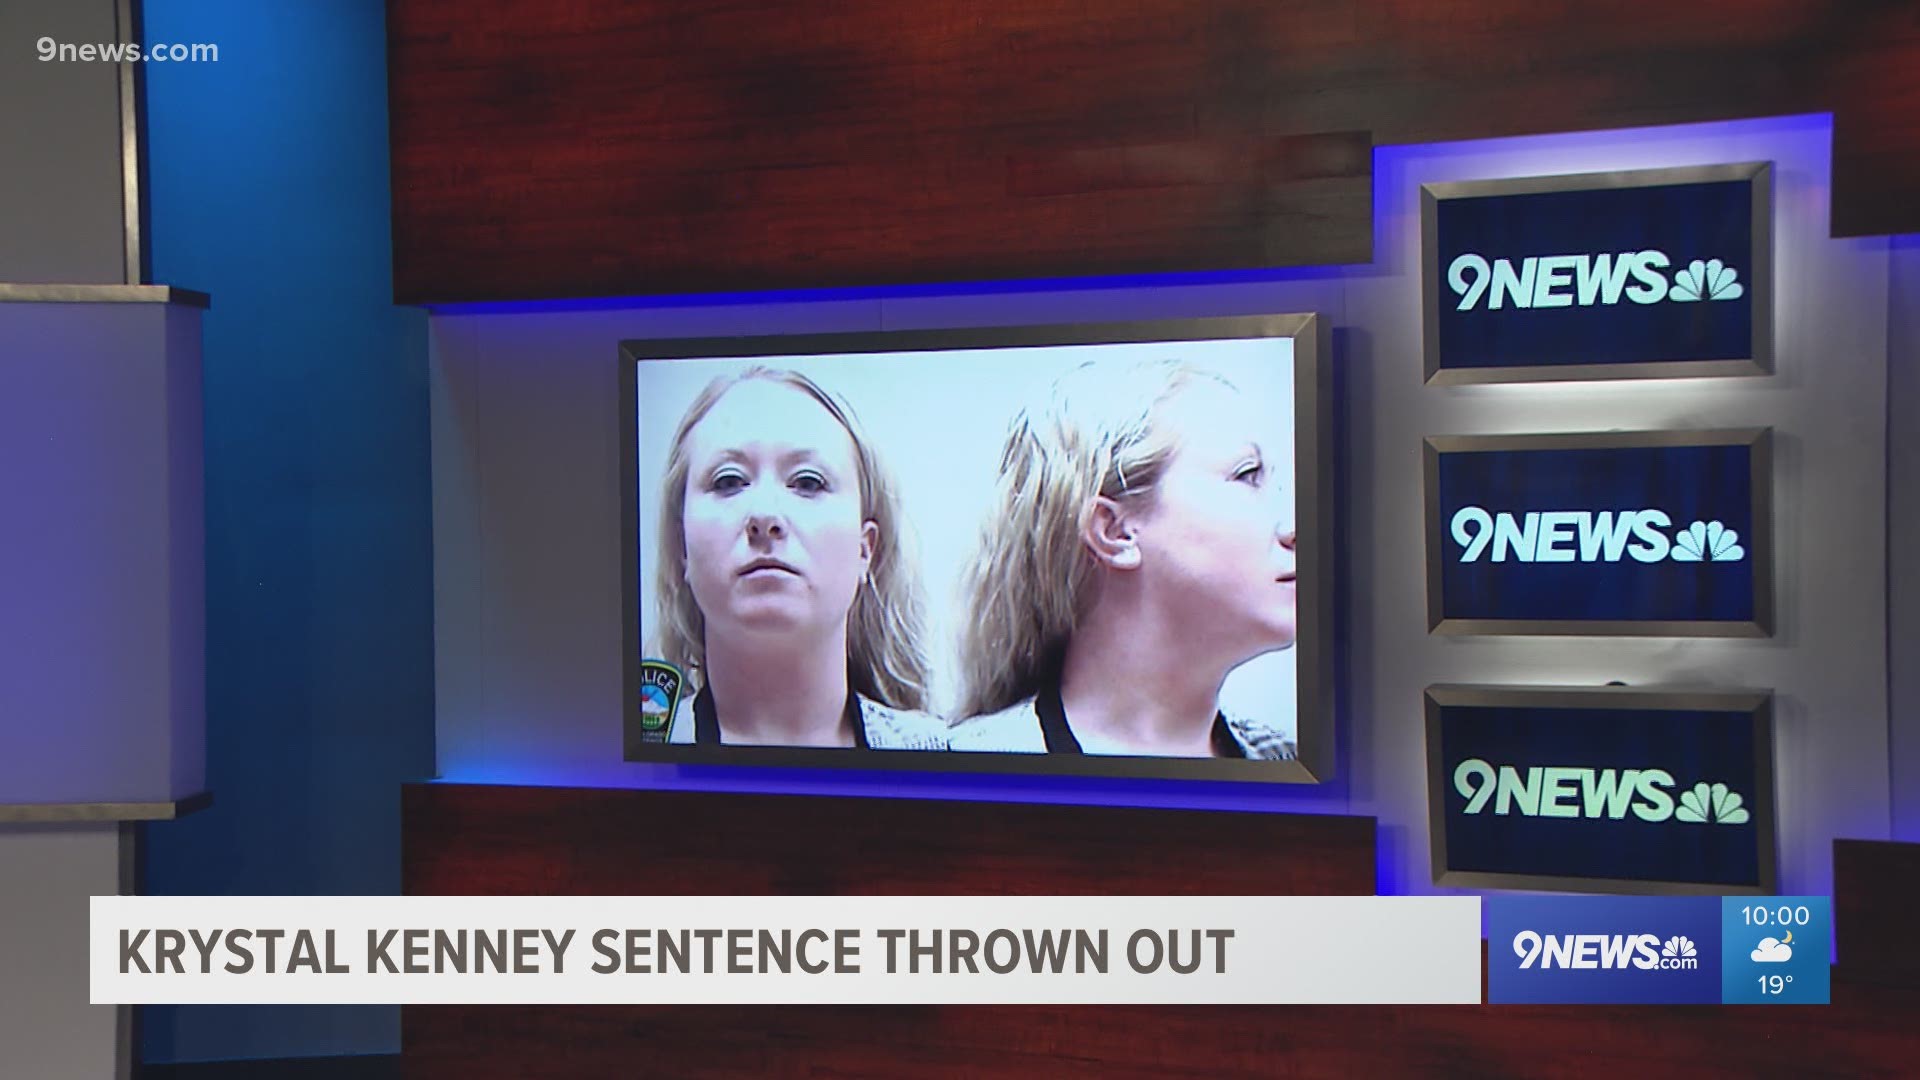 Krystal Lee Kenney admitted to helping clean up the crime scene. Patrick Frazee is serving a life sentence for the murder of Colorado mother Kelsey Berreth.